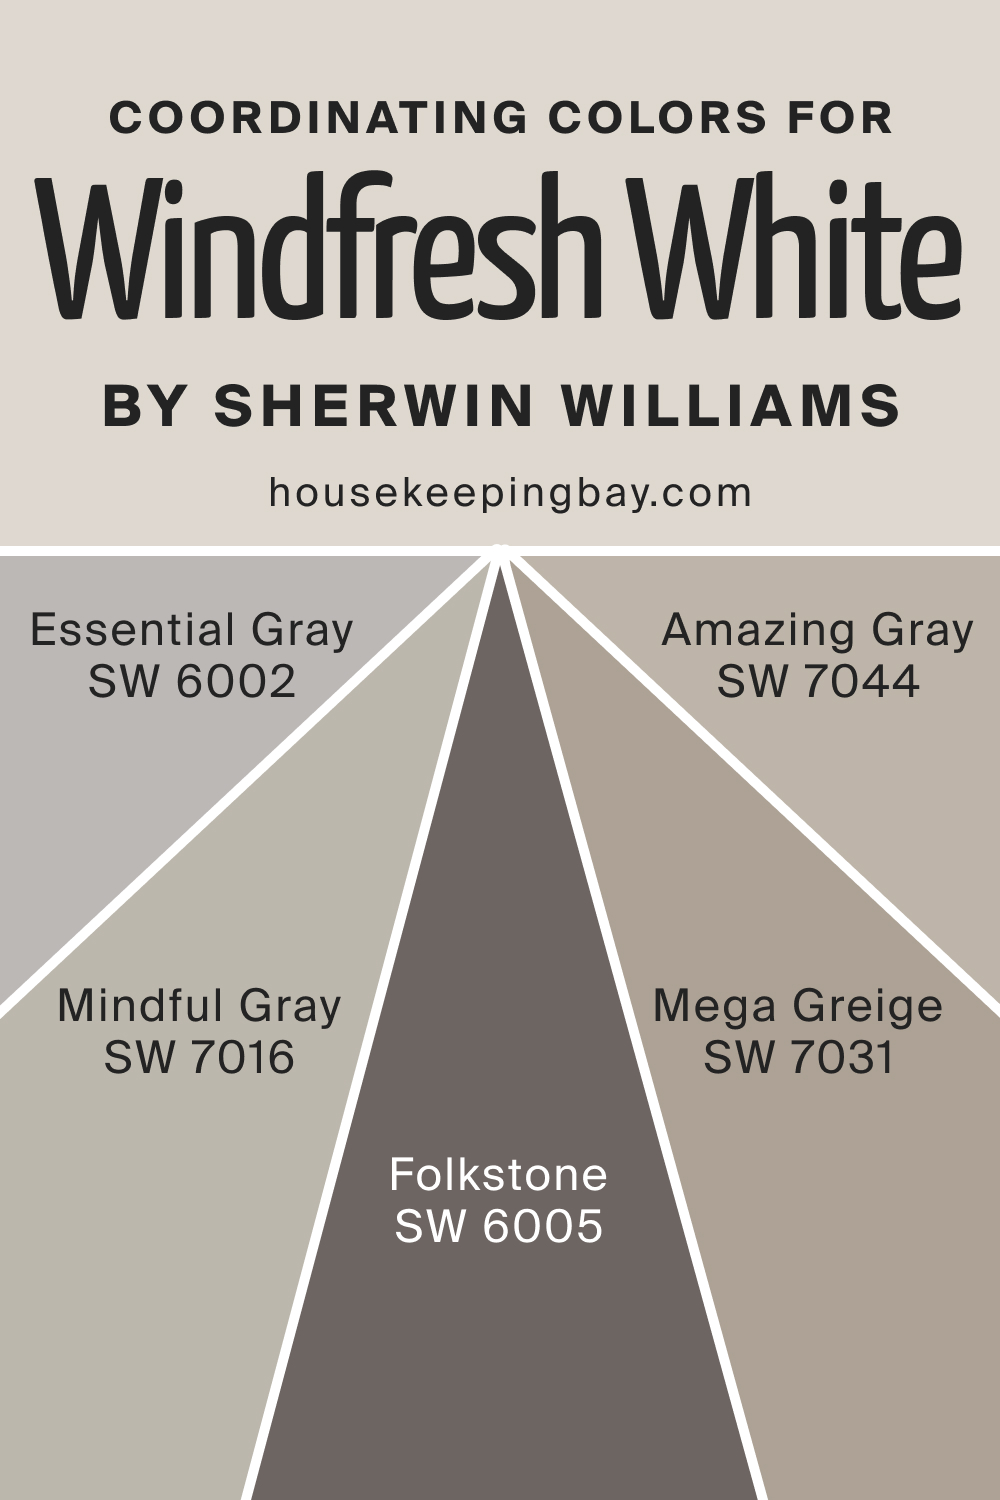 Coordinating Colors for SW Windfresh White by Sherwin Williams